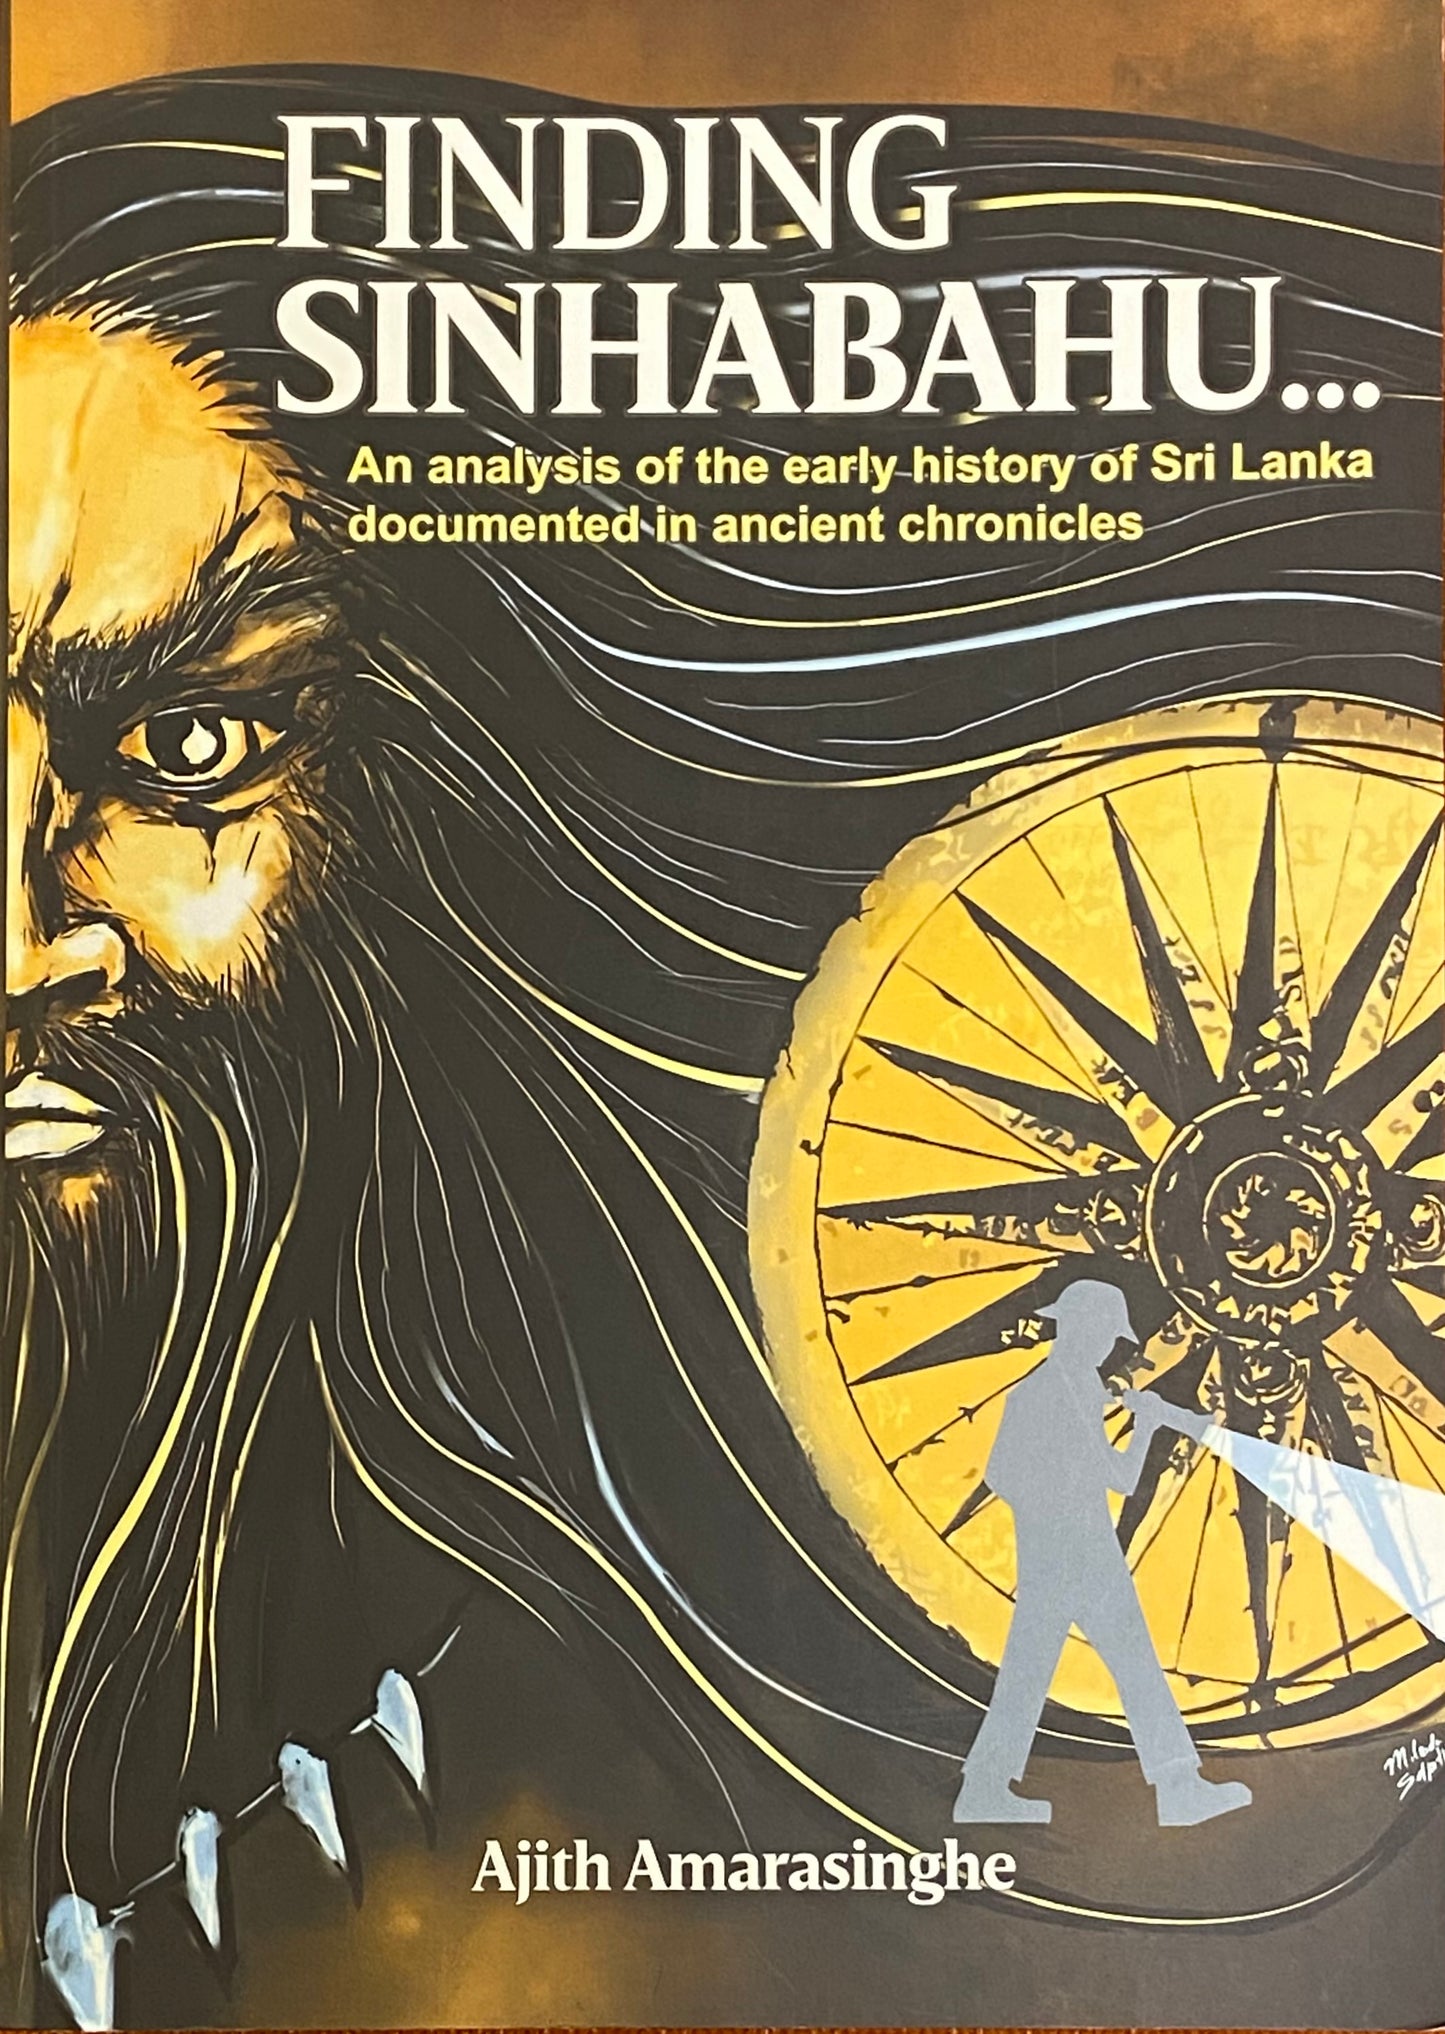 Finding Sinhabahu: An analysis of the early history of Sri Lanka documented in ancient chronicles by Ajith Amarasinghe